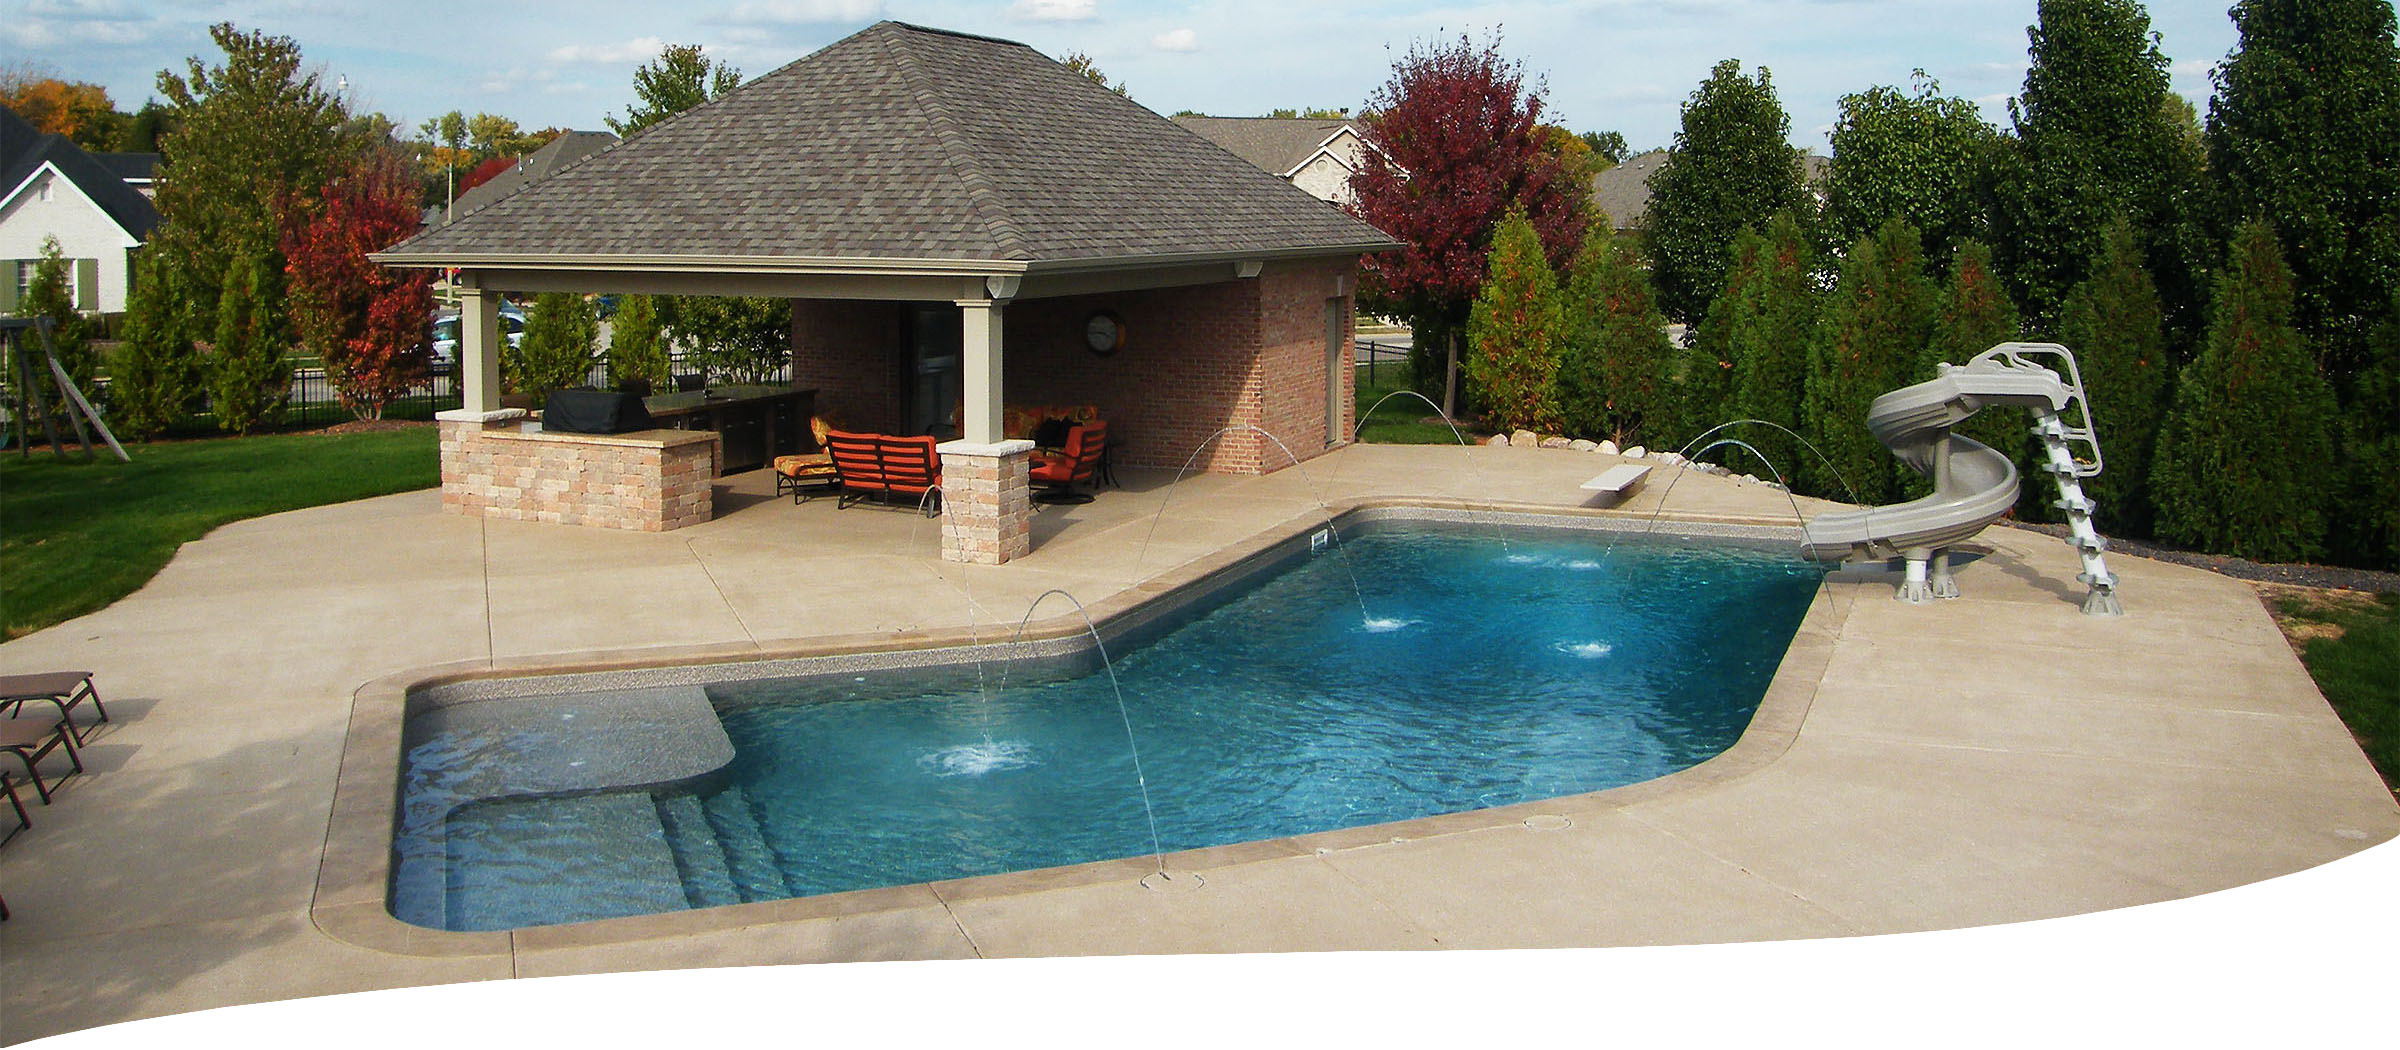 beautiful custom hardscaping, landscaping and pool